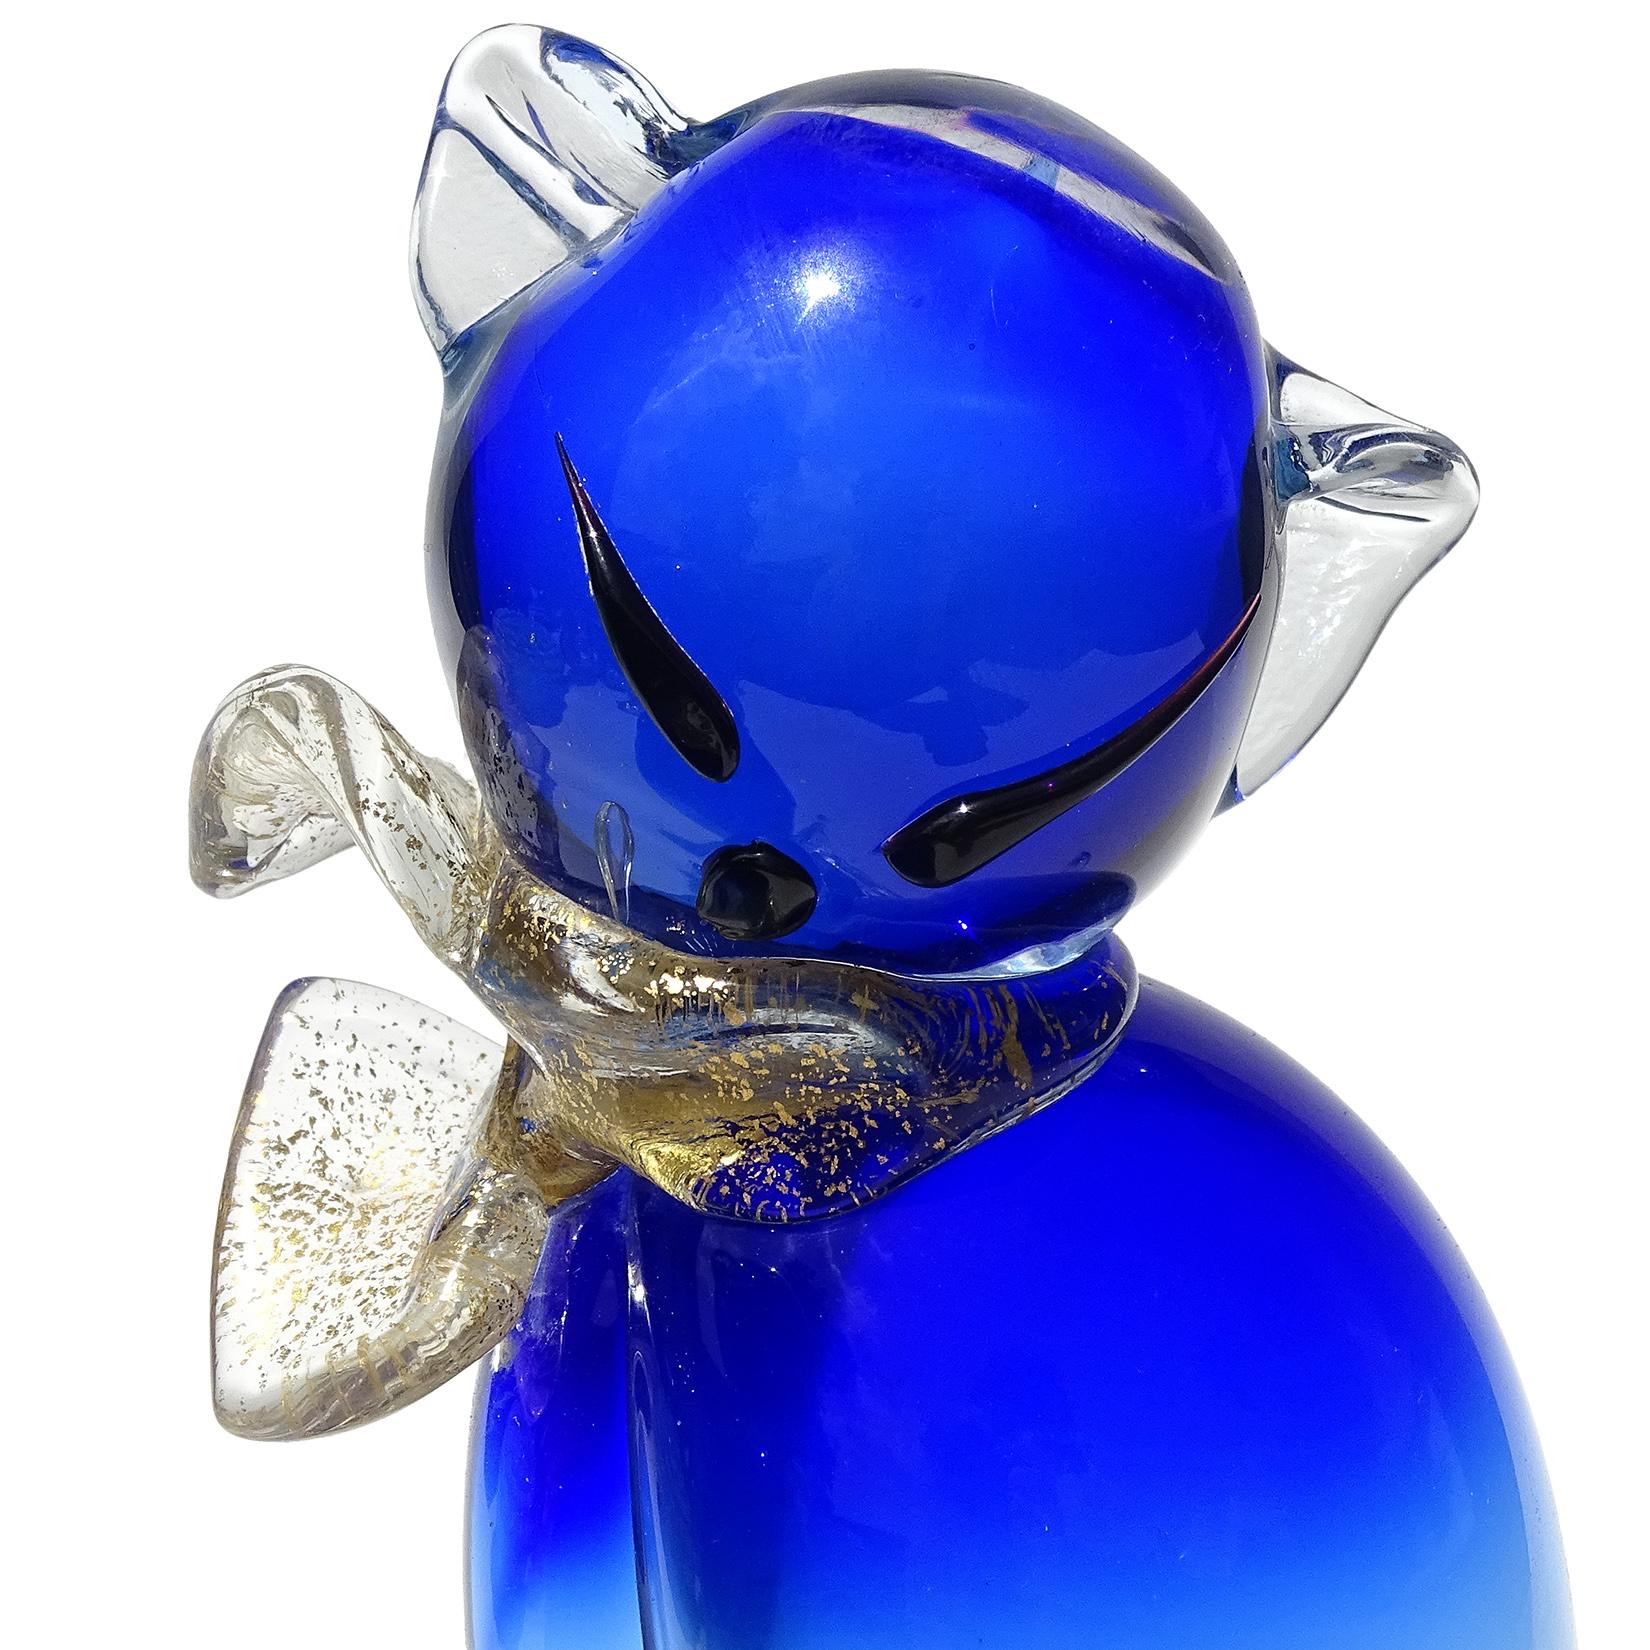 Beautiful and rare, large vintage Murano hand blown Sommerso cobalt to sky blue, gold flecks Italian art glass double kitty cats sculpture. Attributed to the Salviati company, by designer Alfredo Barbini, circa 1950s. The sculpture has an original